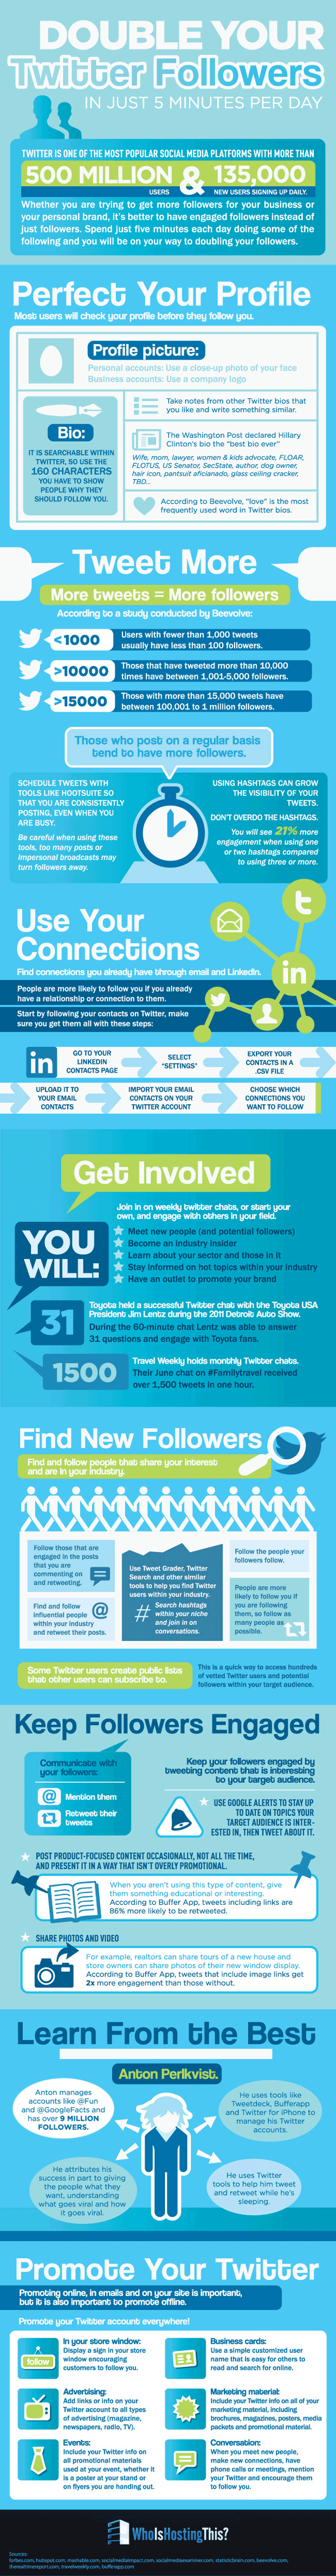 How to Get More Twitter Followers Infographic